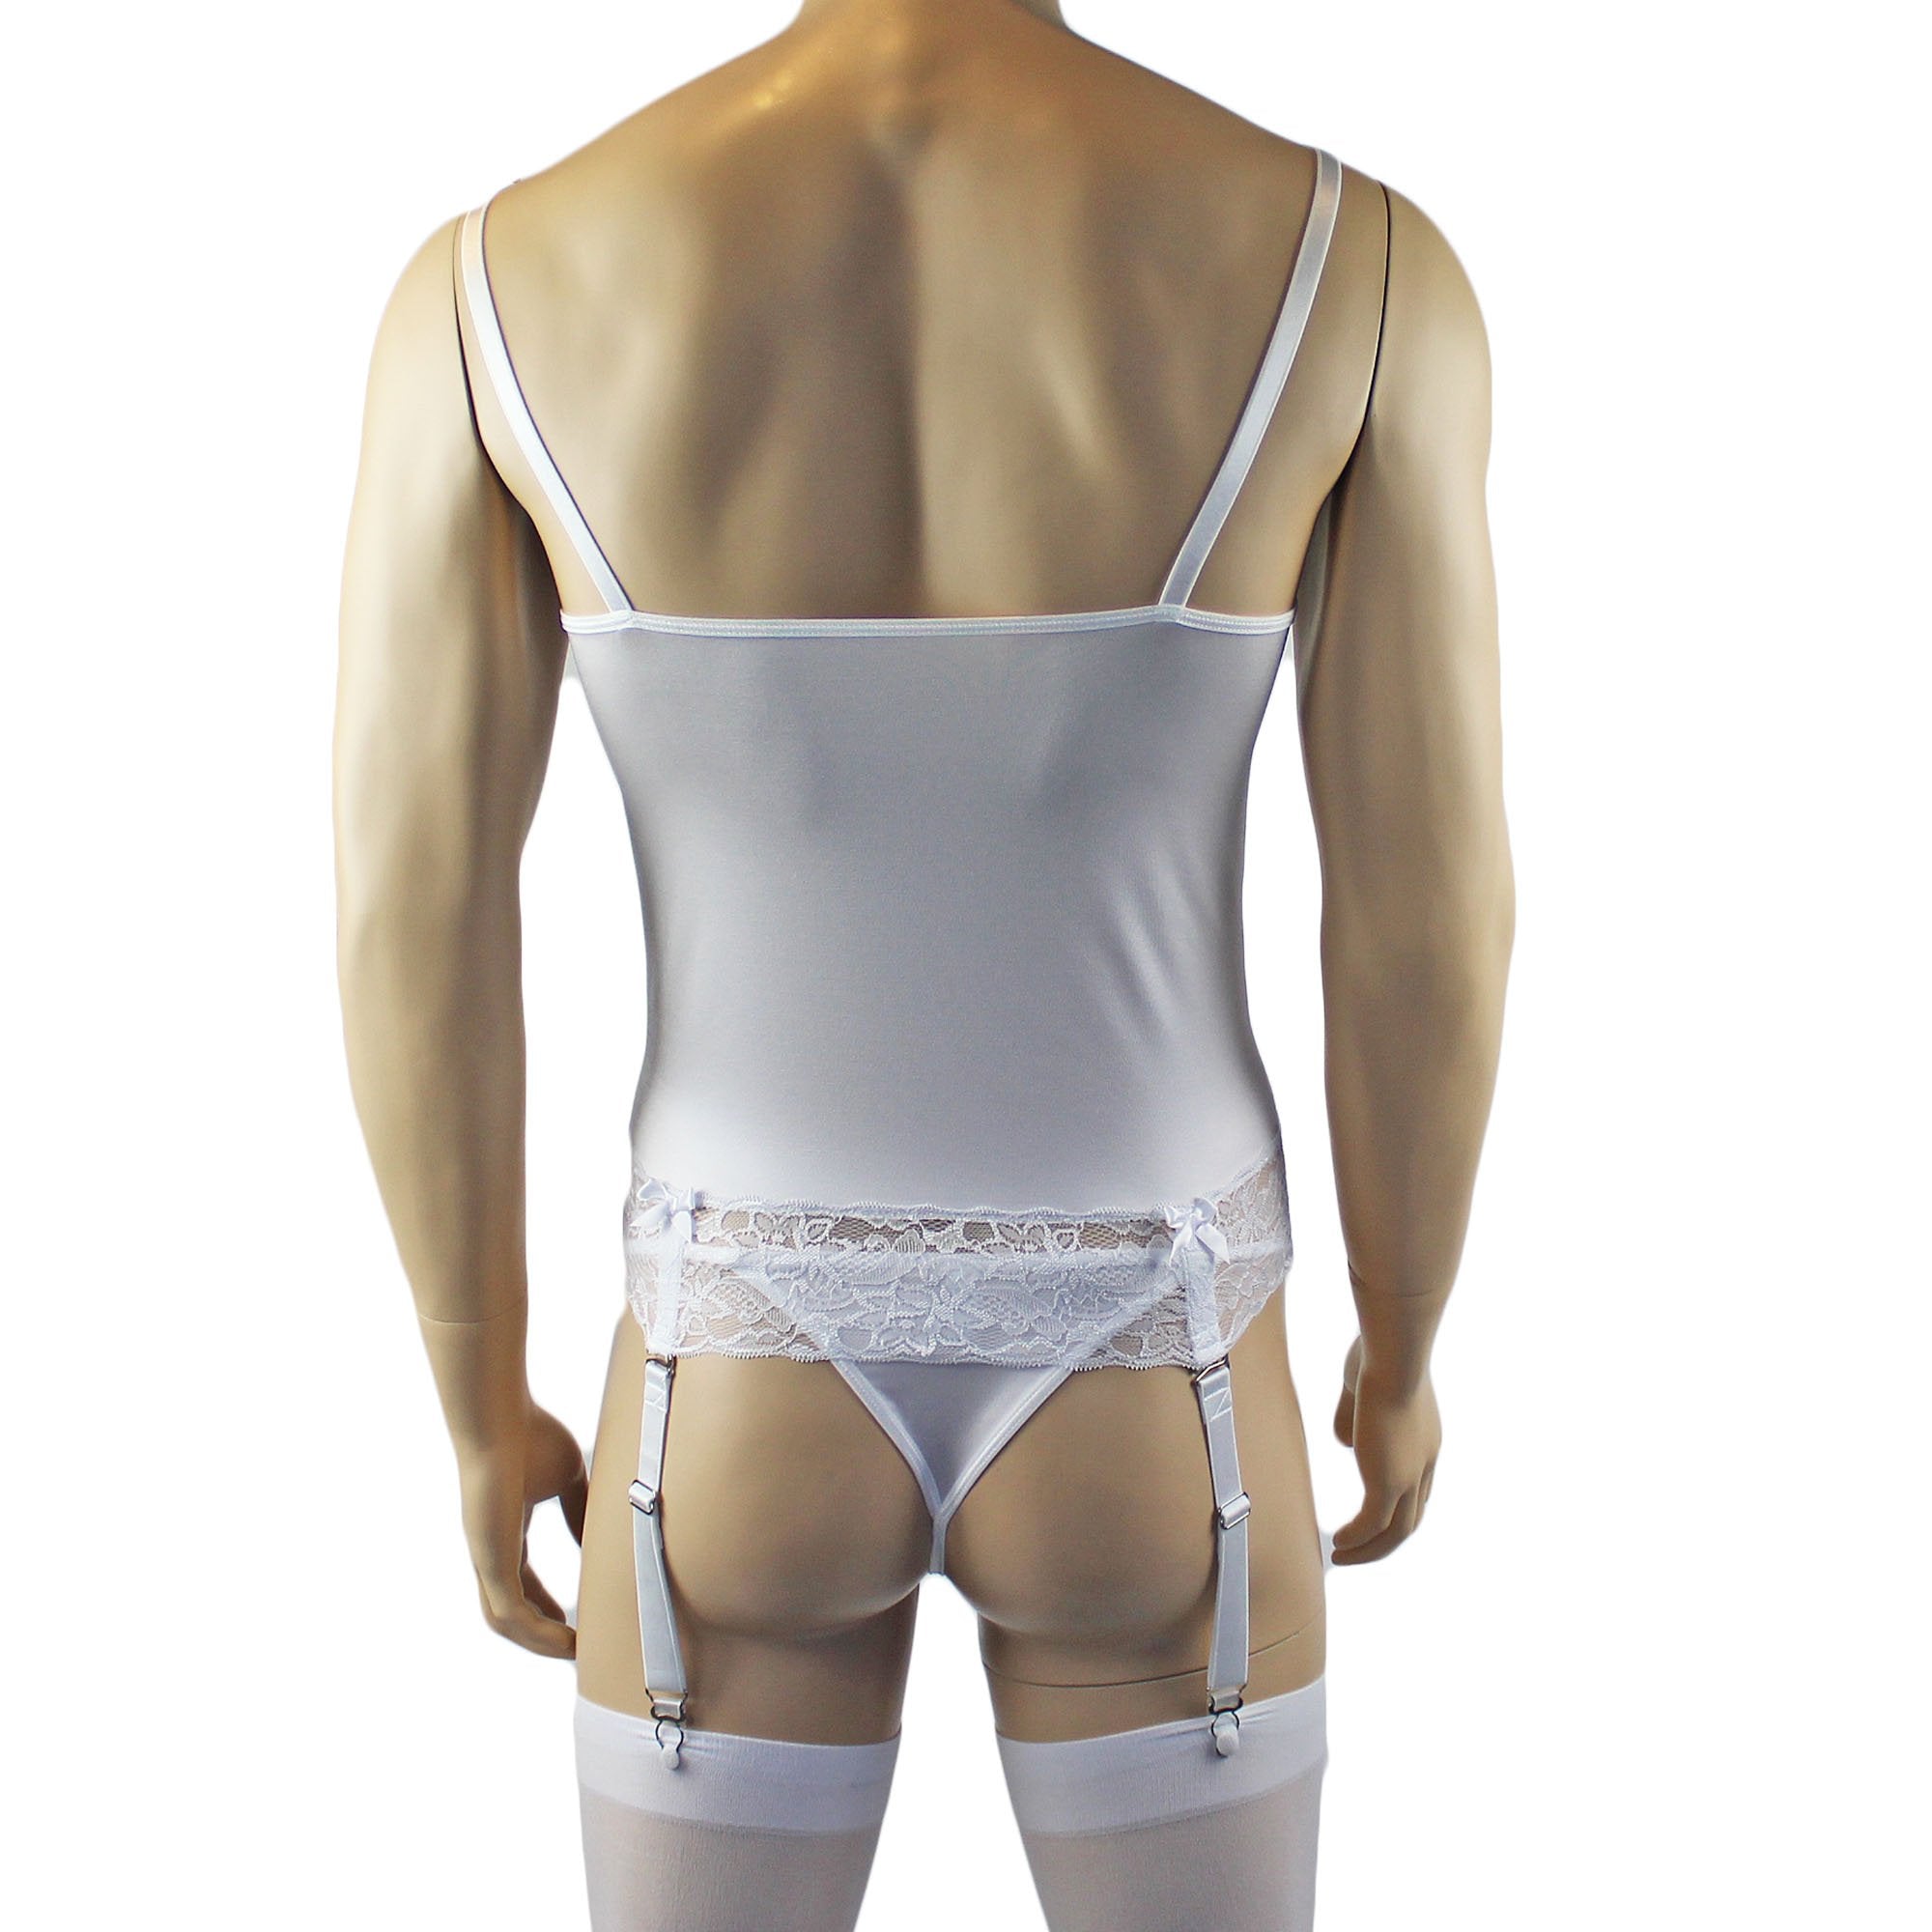 Male Romance Stretch Spandex Corset Camisole Top & G string for Lingerie Men White or Black